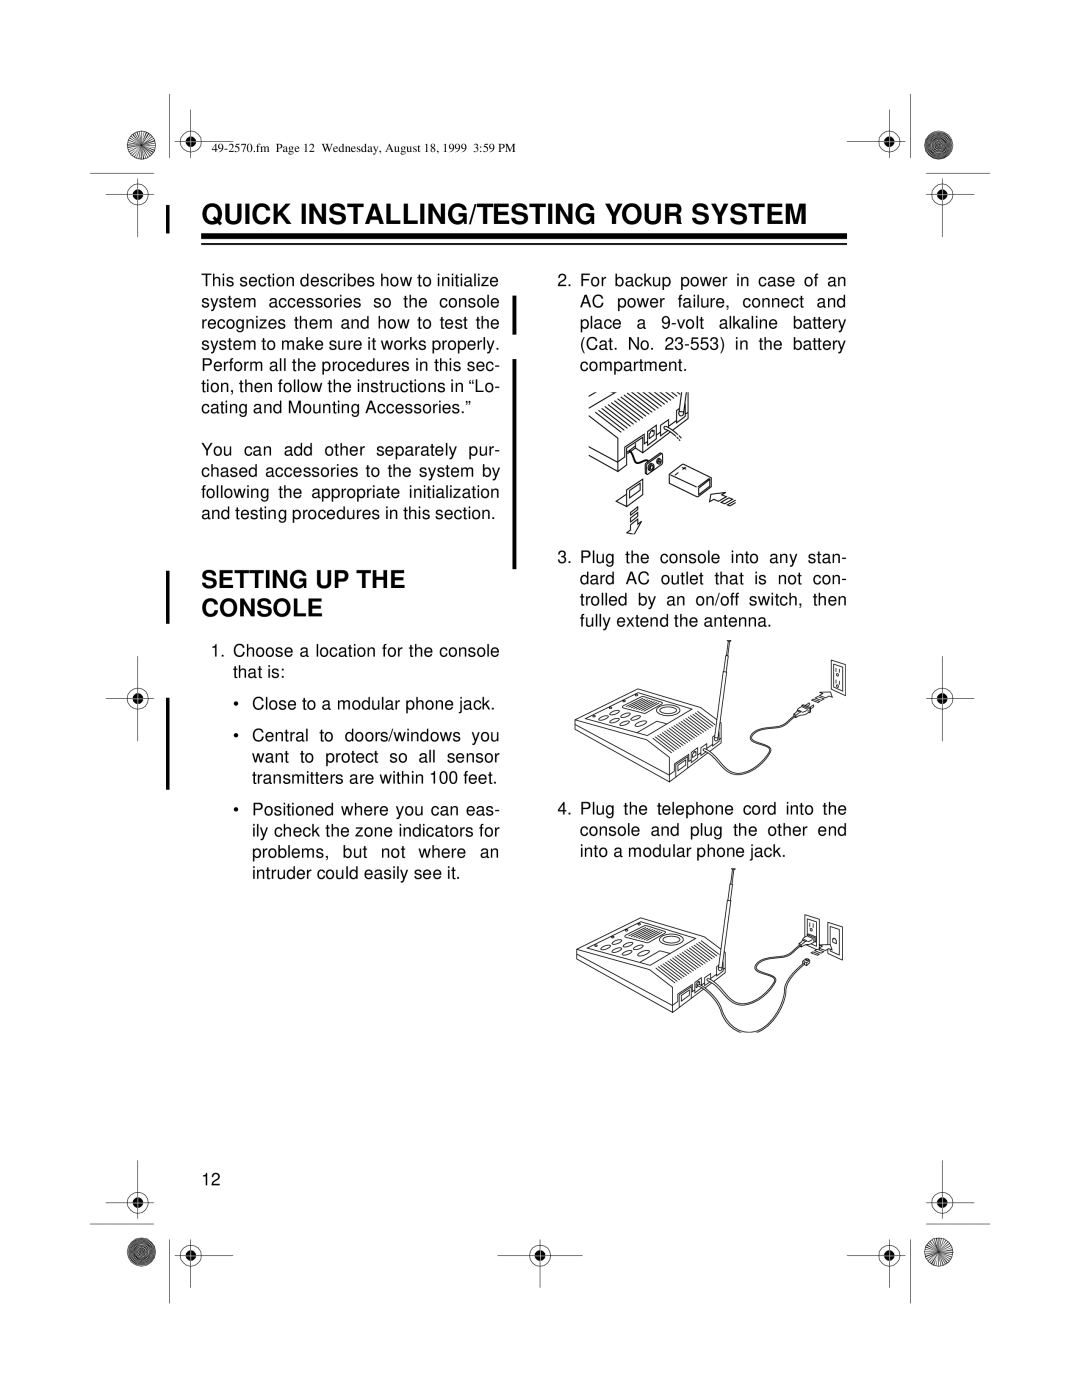 Radio Shack 49-2570 owner manual Quick Installing/Testing Your System, Setting Up The Console 